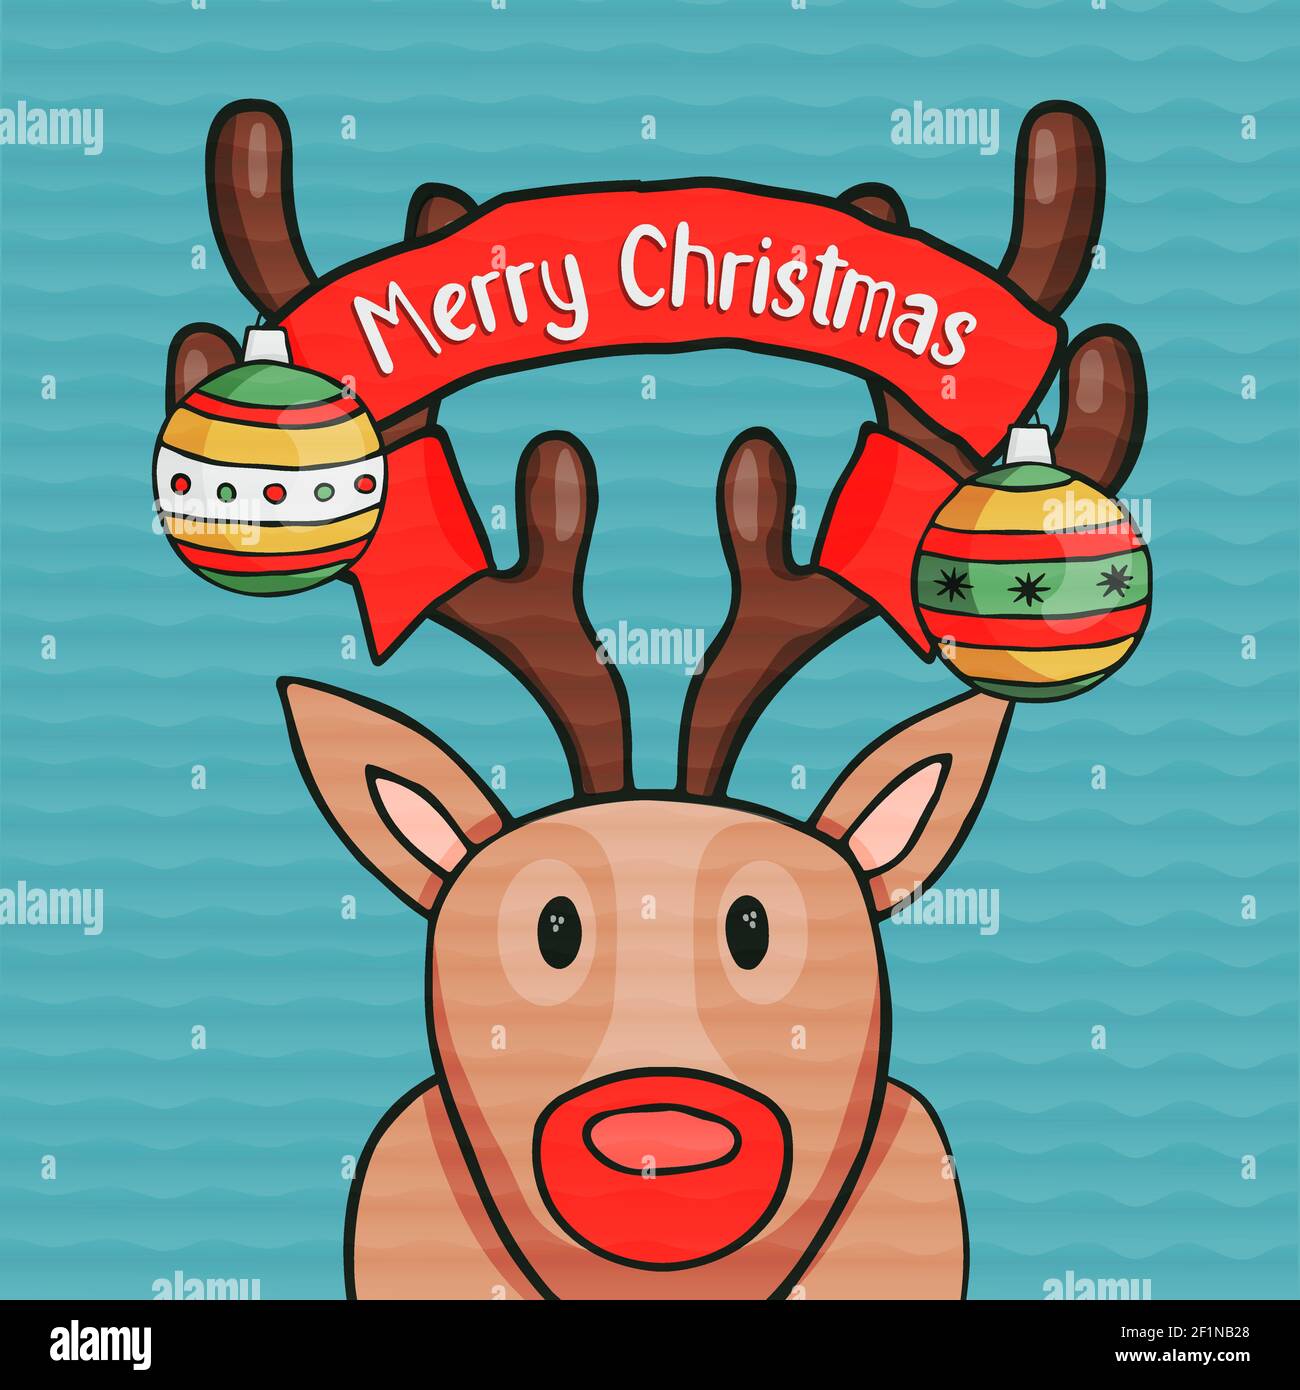 Merry Christmas greeting card illustration of funny reindeer with red nose in hand drawn style. Traditional holiday cartoon deer for xmas wishes or pa Stock Vector